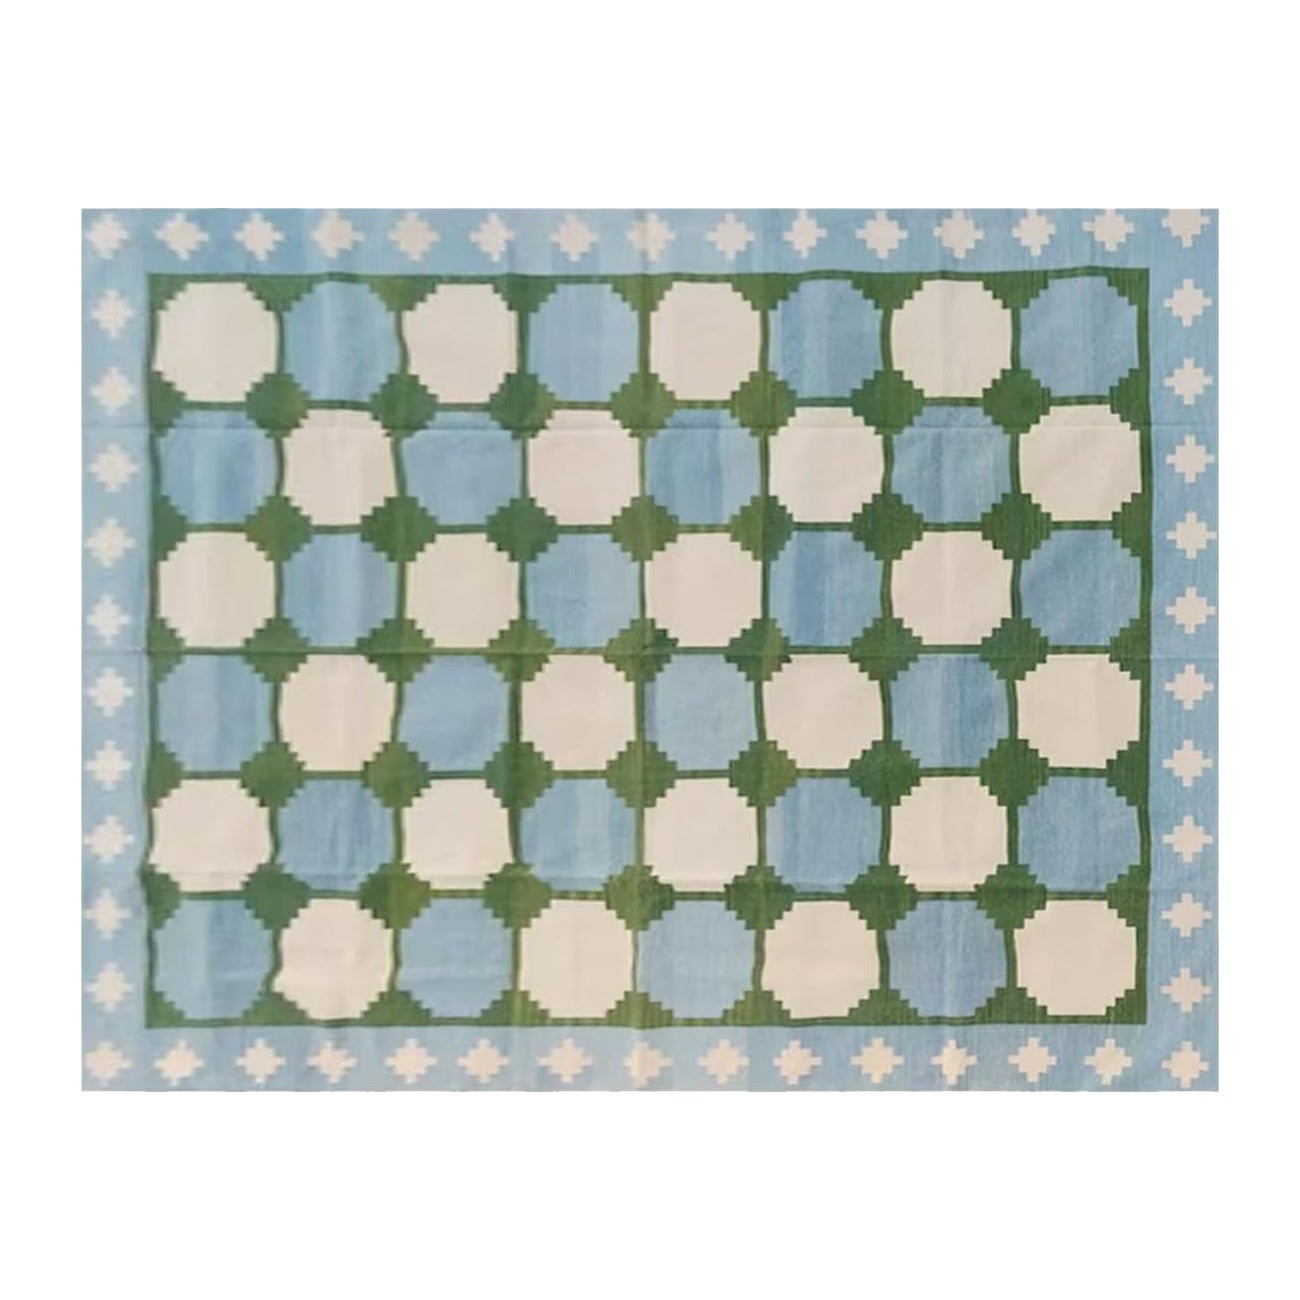 Handmade Cotton Flat Weave Rug, 9x12 Green And Blue Tile Pattern Indian Dhurrie